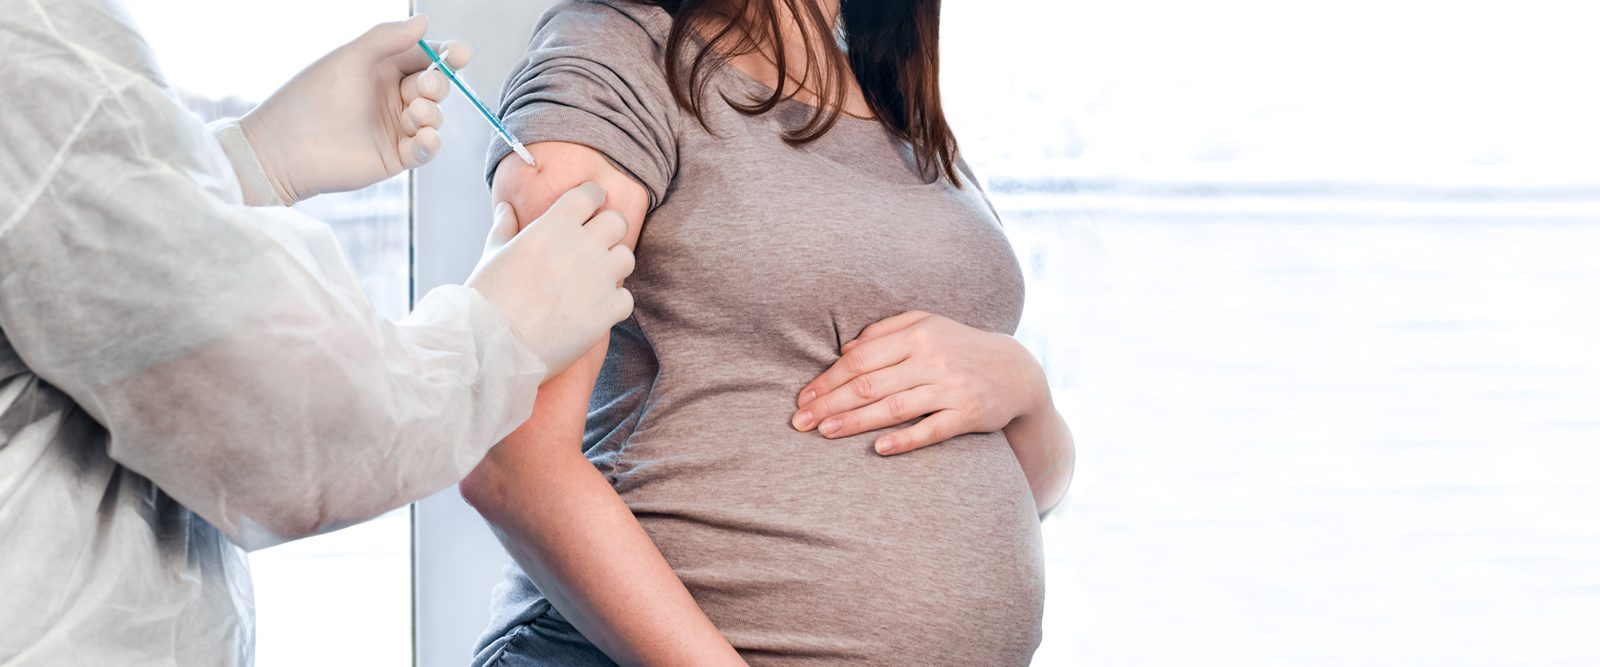 Pregnant woman getting a vaccine